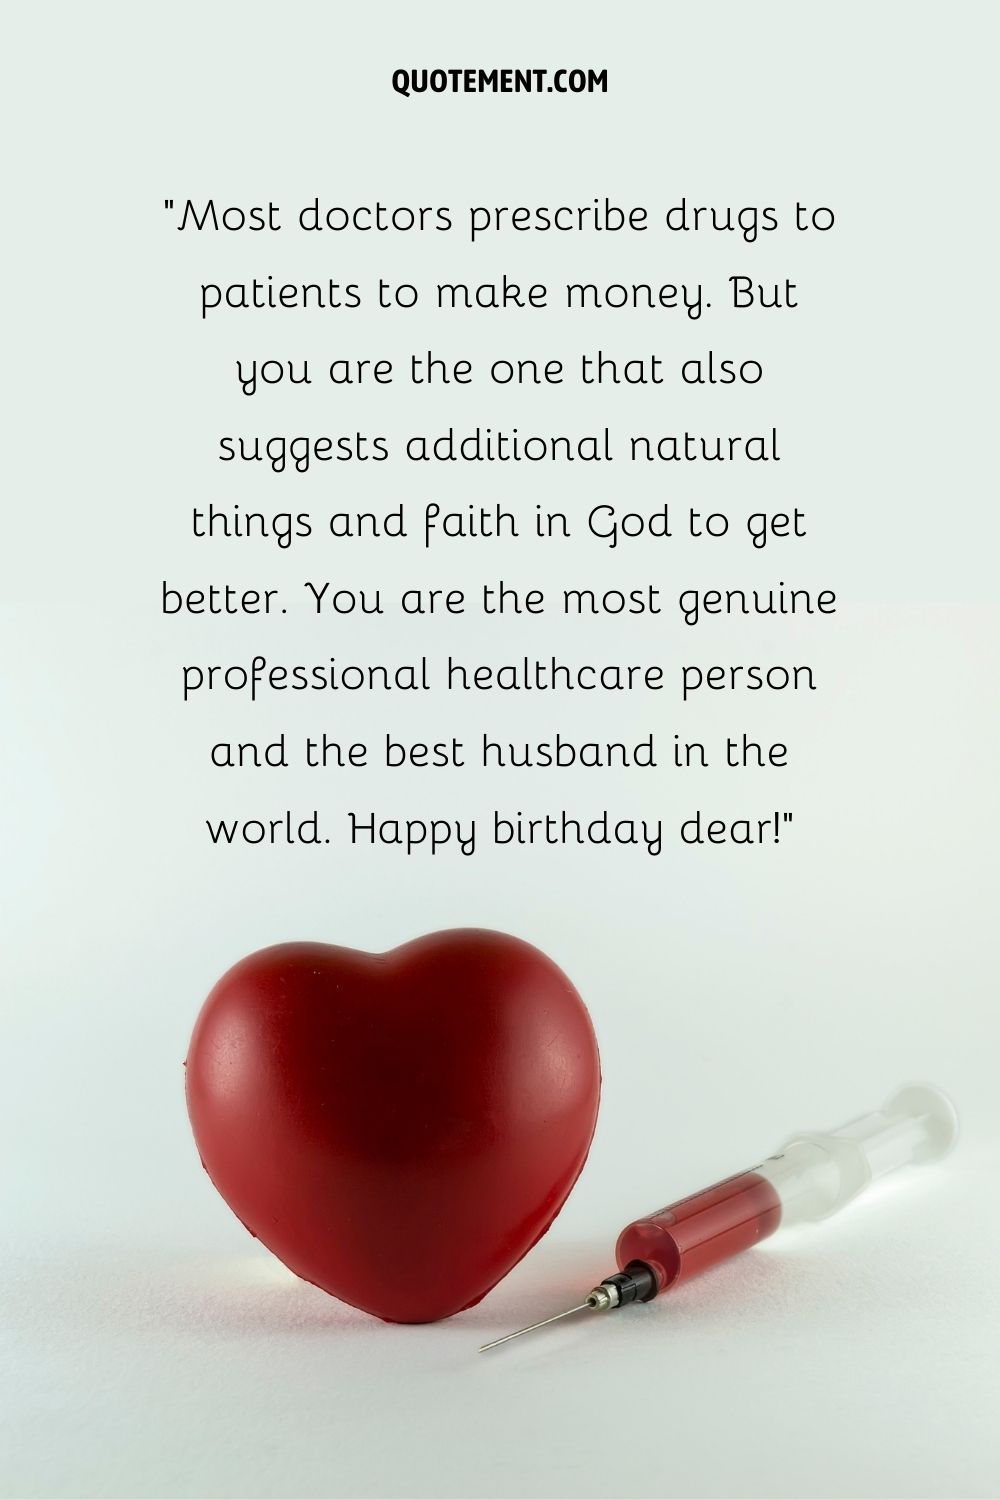 genuine birthday wish for a husband represented by doctor wish happy birthday